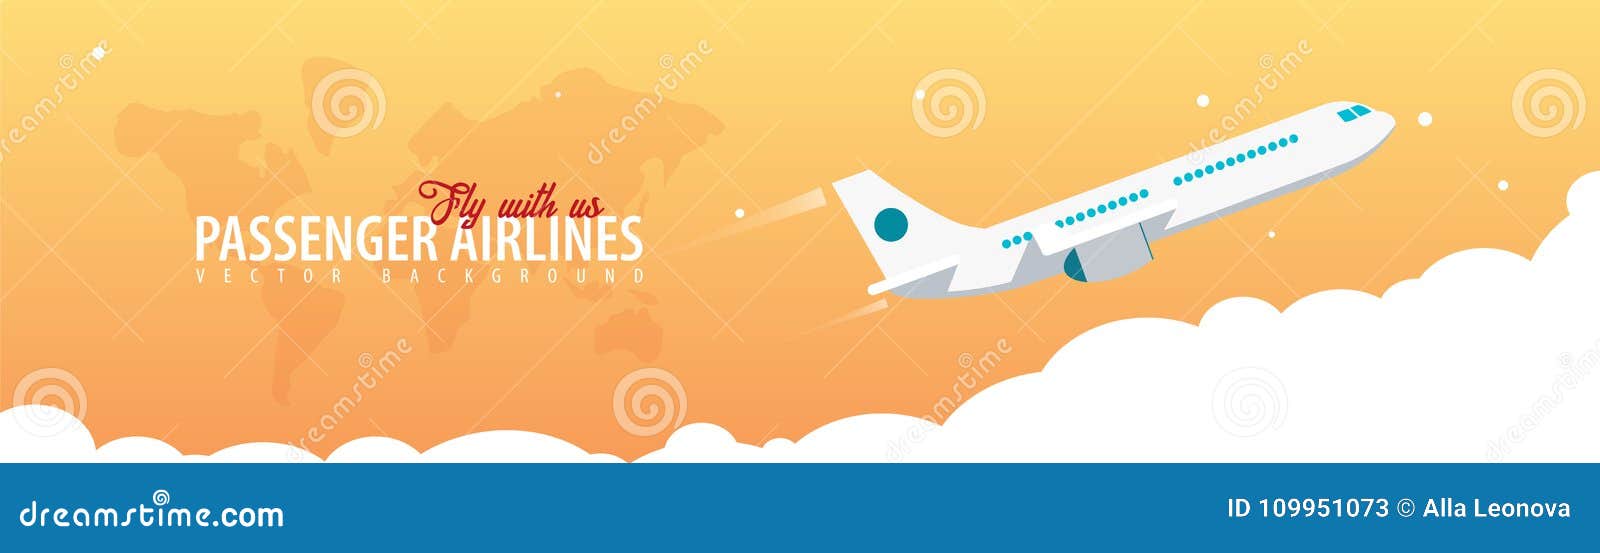 Passenger Airlines. Clouds sky background with airplane. Vector illustration.